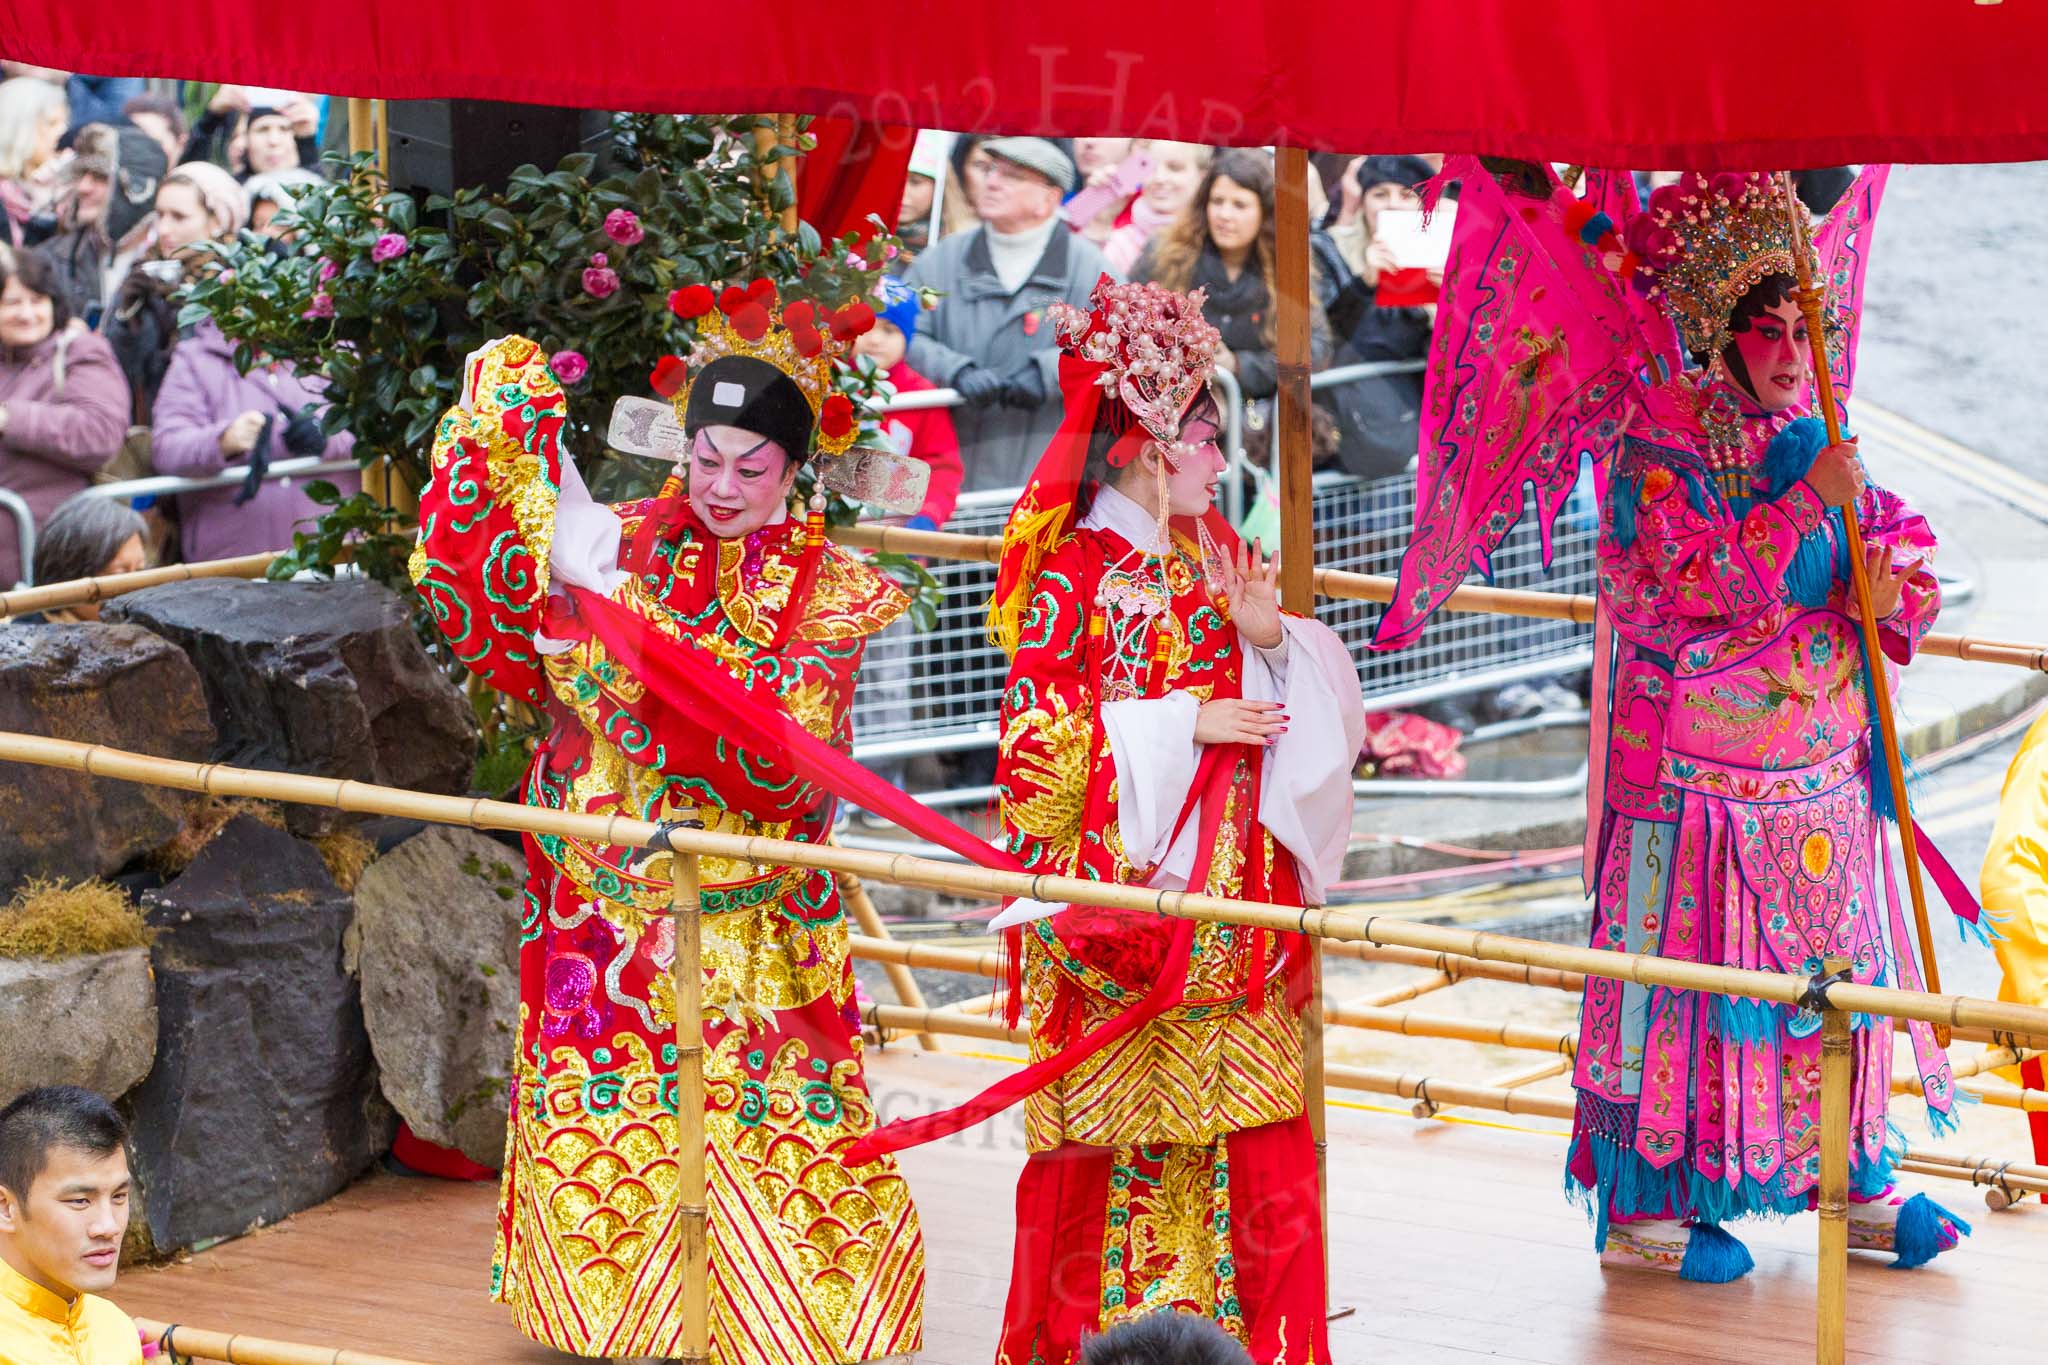 Lord Mayor's Show 2012: Entry 38 - Hong Kong Economic & Trade Office, London focuses this year on the Cantonese opera..
Press stand opposite Mansion House, City of London,
London,
Greater London,
United Kingdom,
on 10 November 2012 at 11:16, image #567